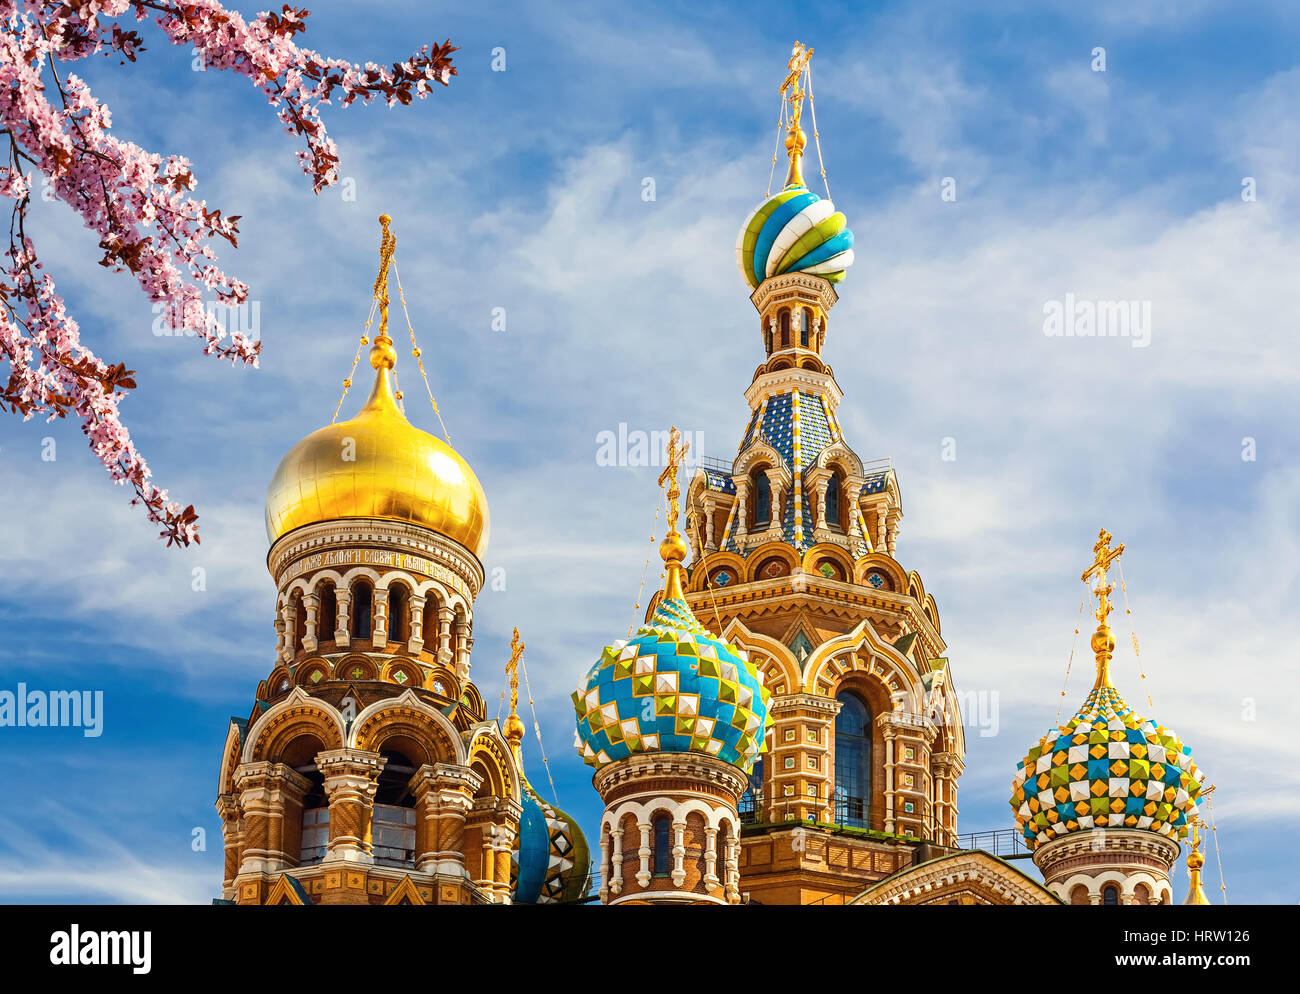 Church of the Savior on Spilled Blood in St. Petersburg, Russia Stock Photo